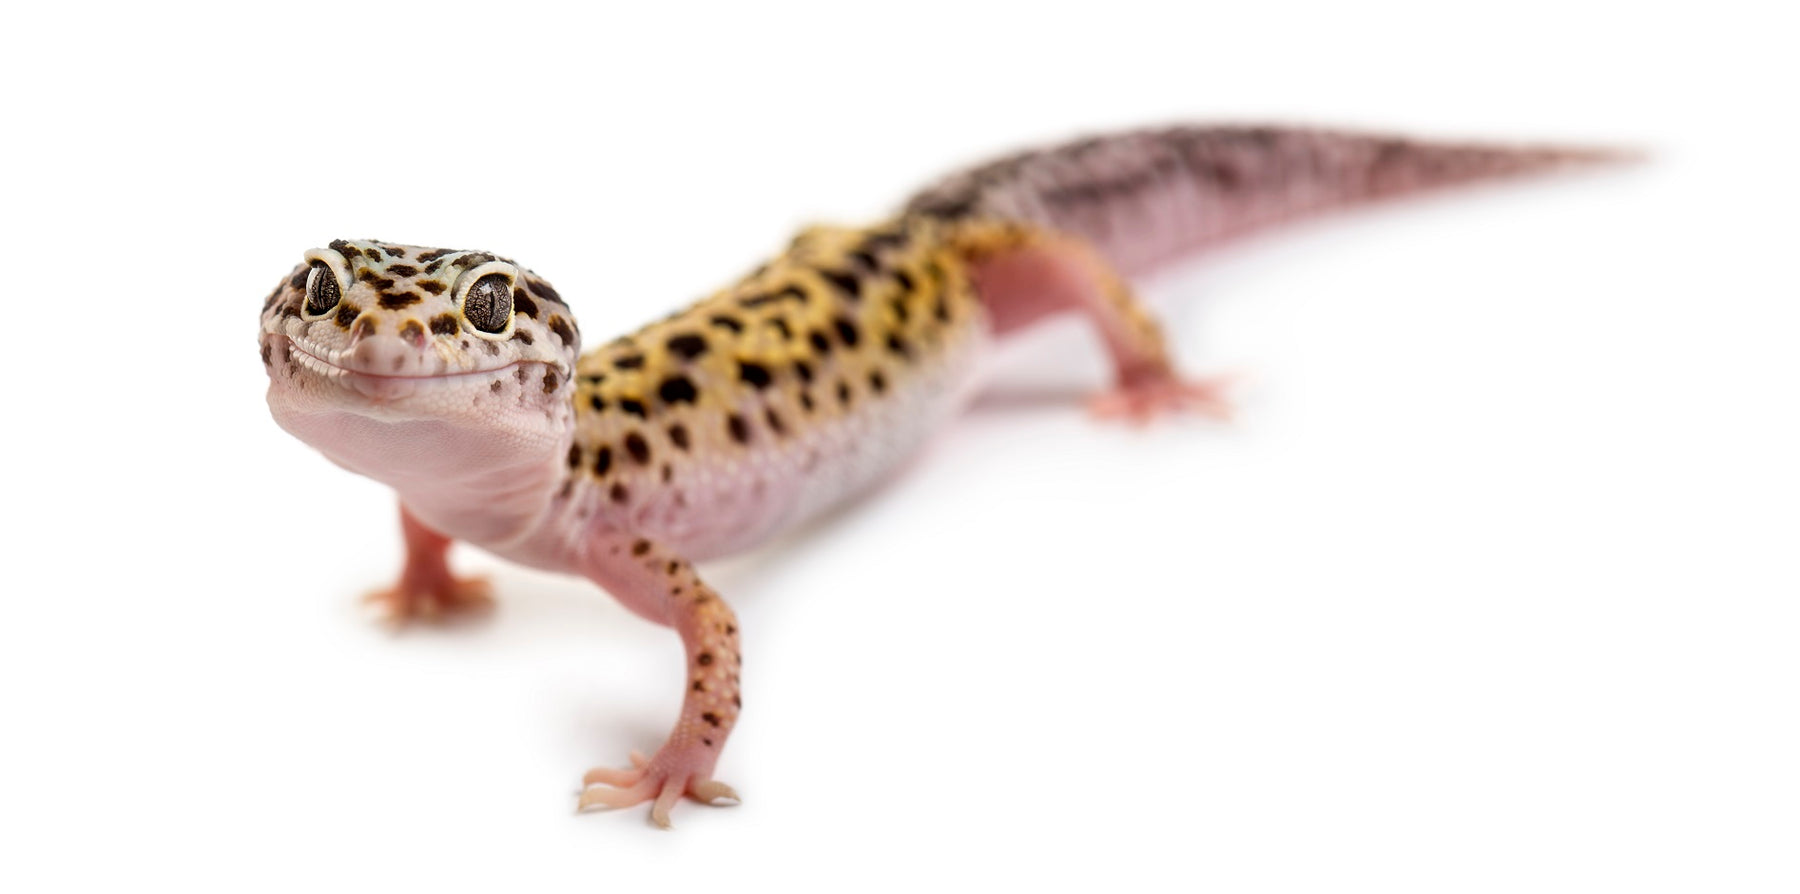 How Long Can Leopard Geckos Go without Food?